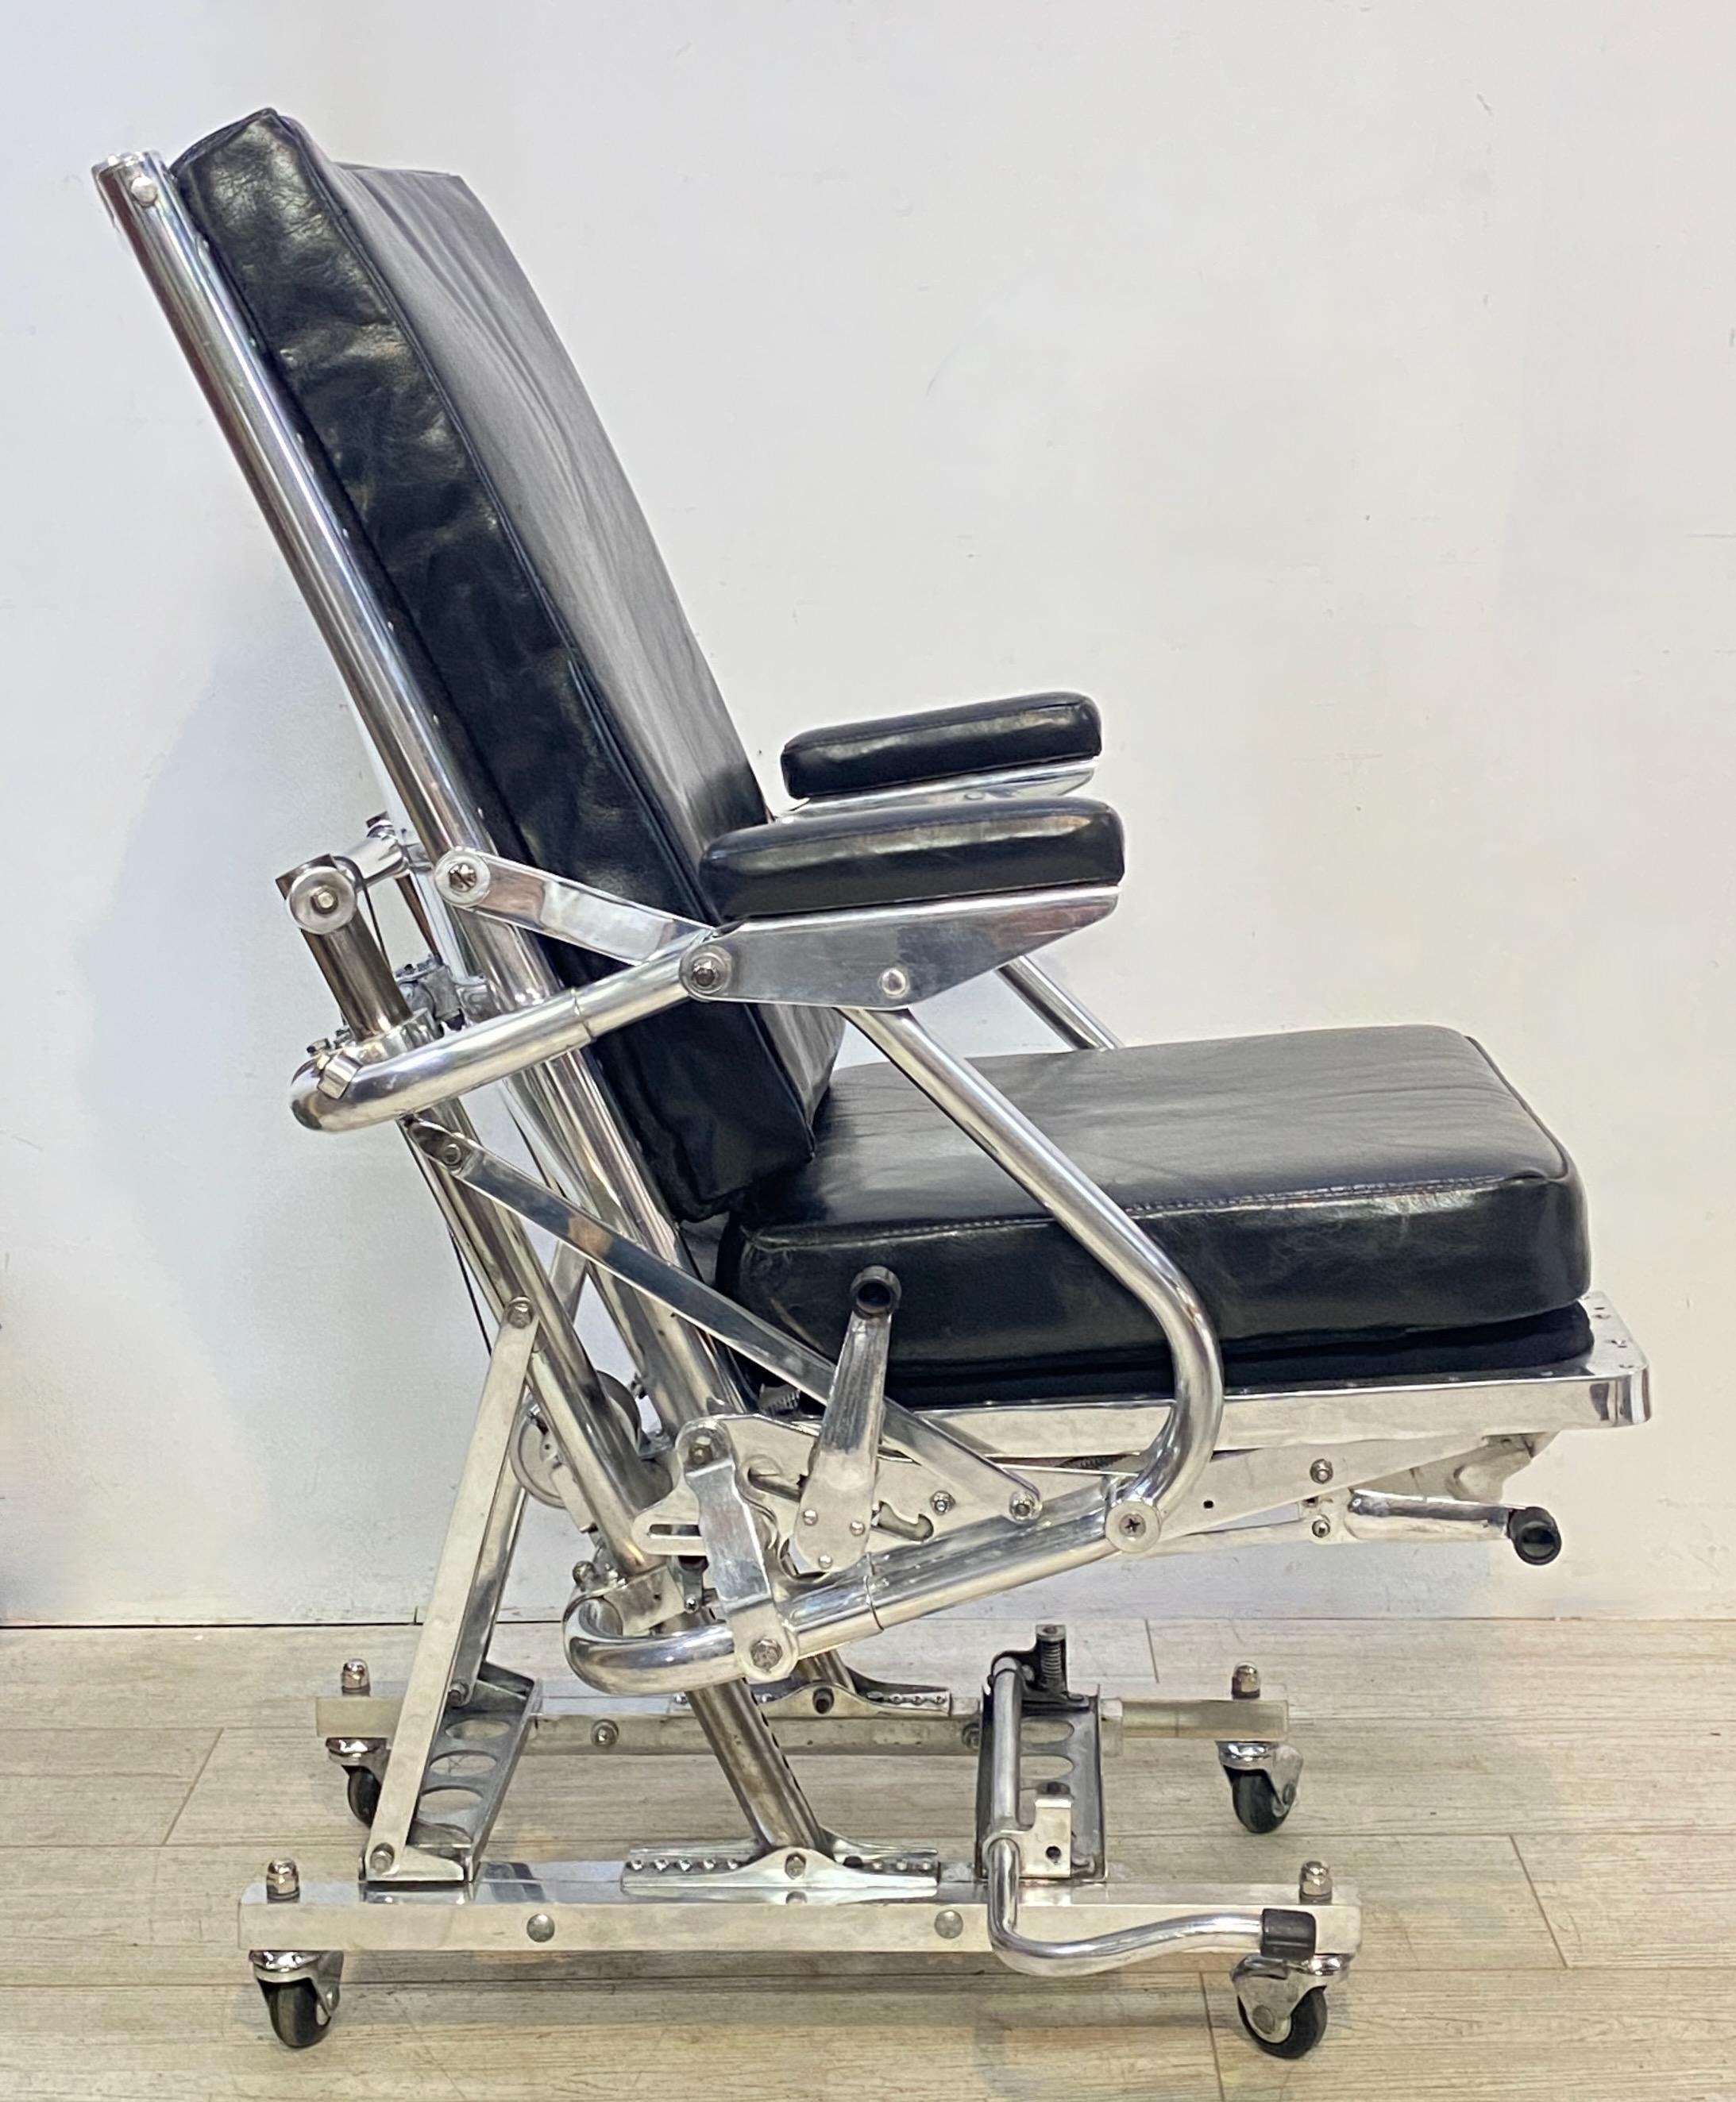 Space age hyper-modern aluminum and steel aircraft chair. Extremely comfortable and needless to say very sturdy and durable. Was originally coated in paint. Now professionally polished and upholstered in black leather.
Mid 20th century.